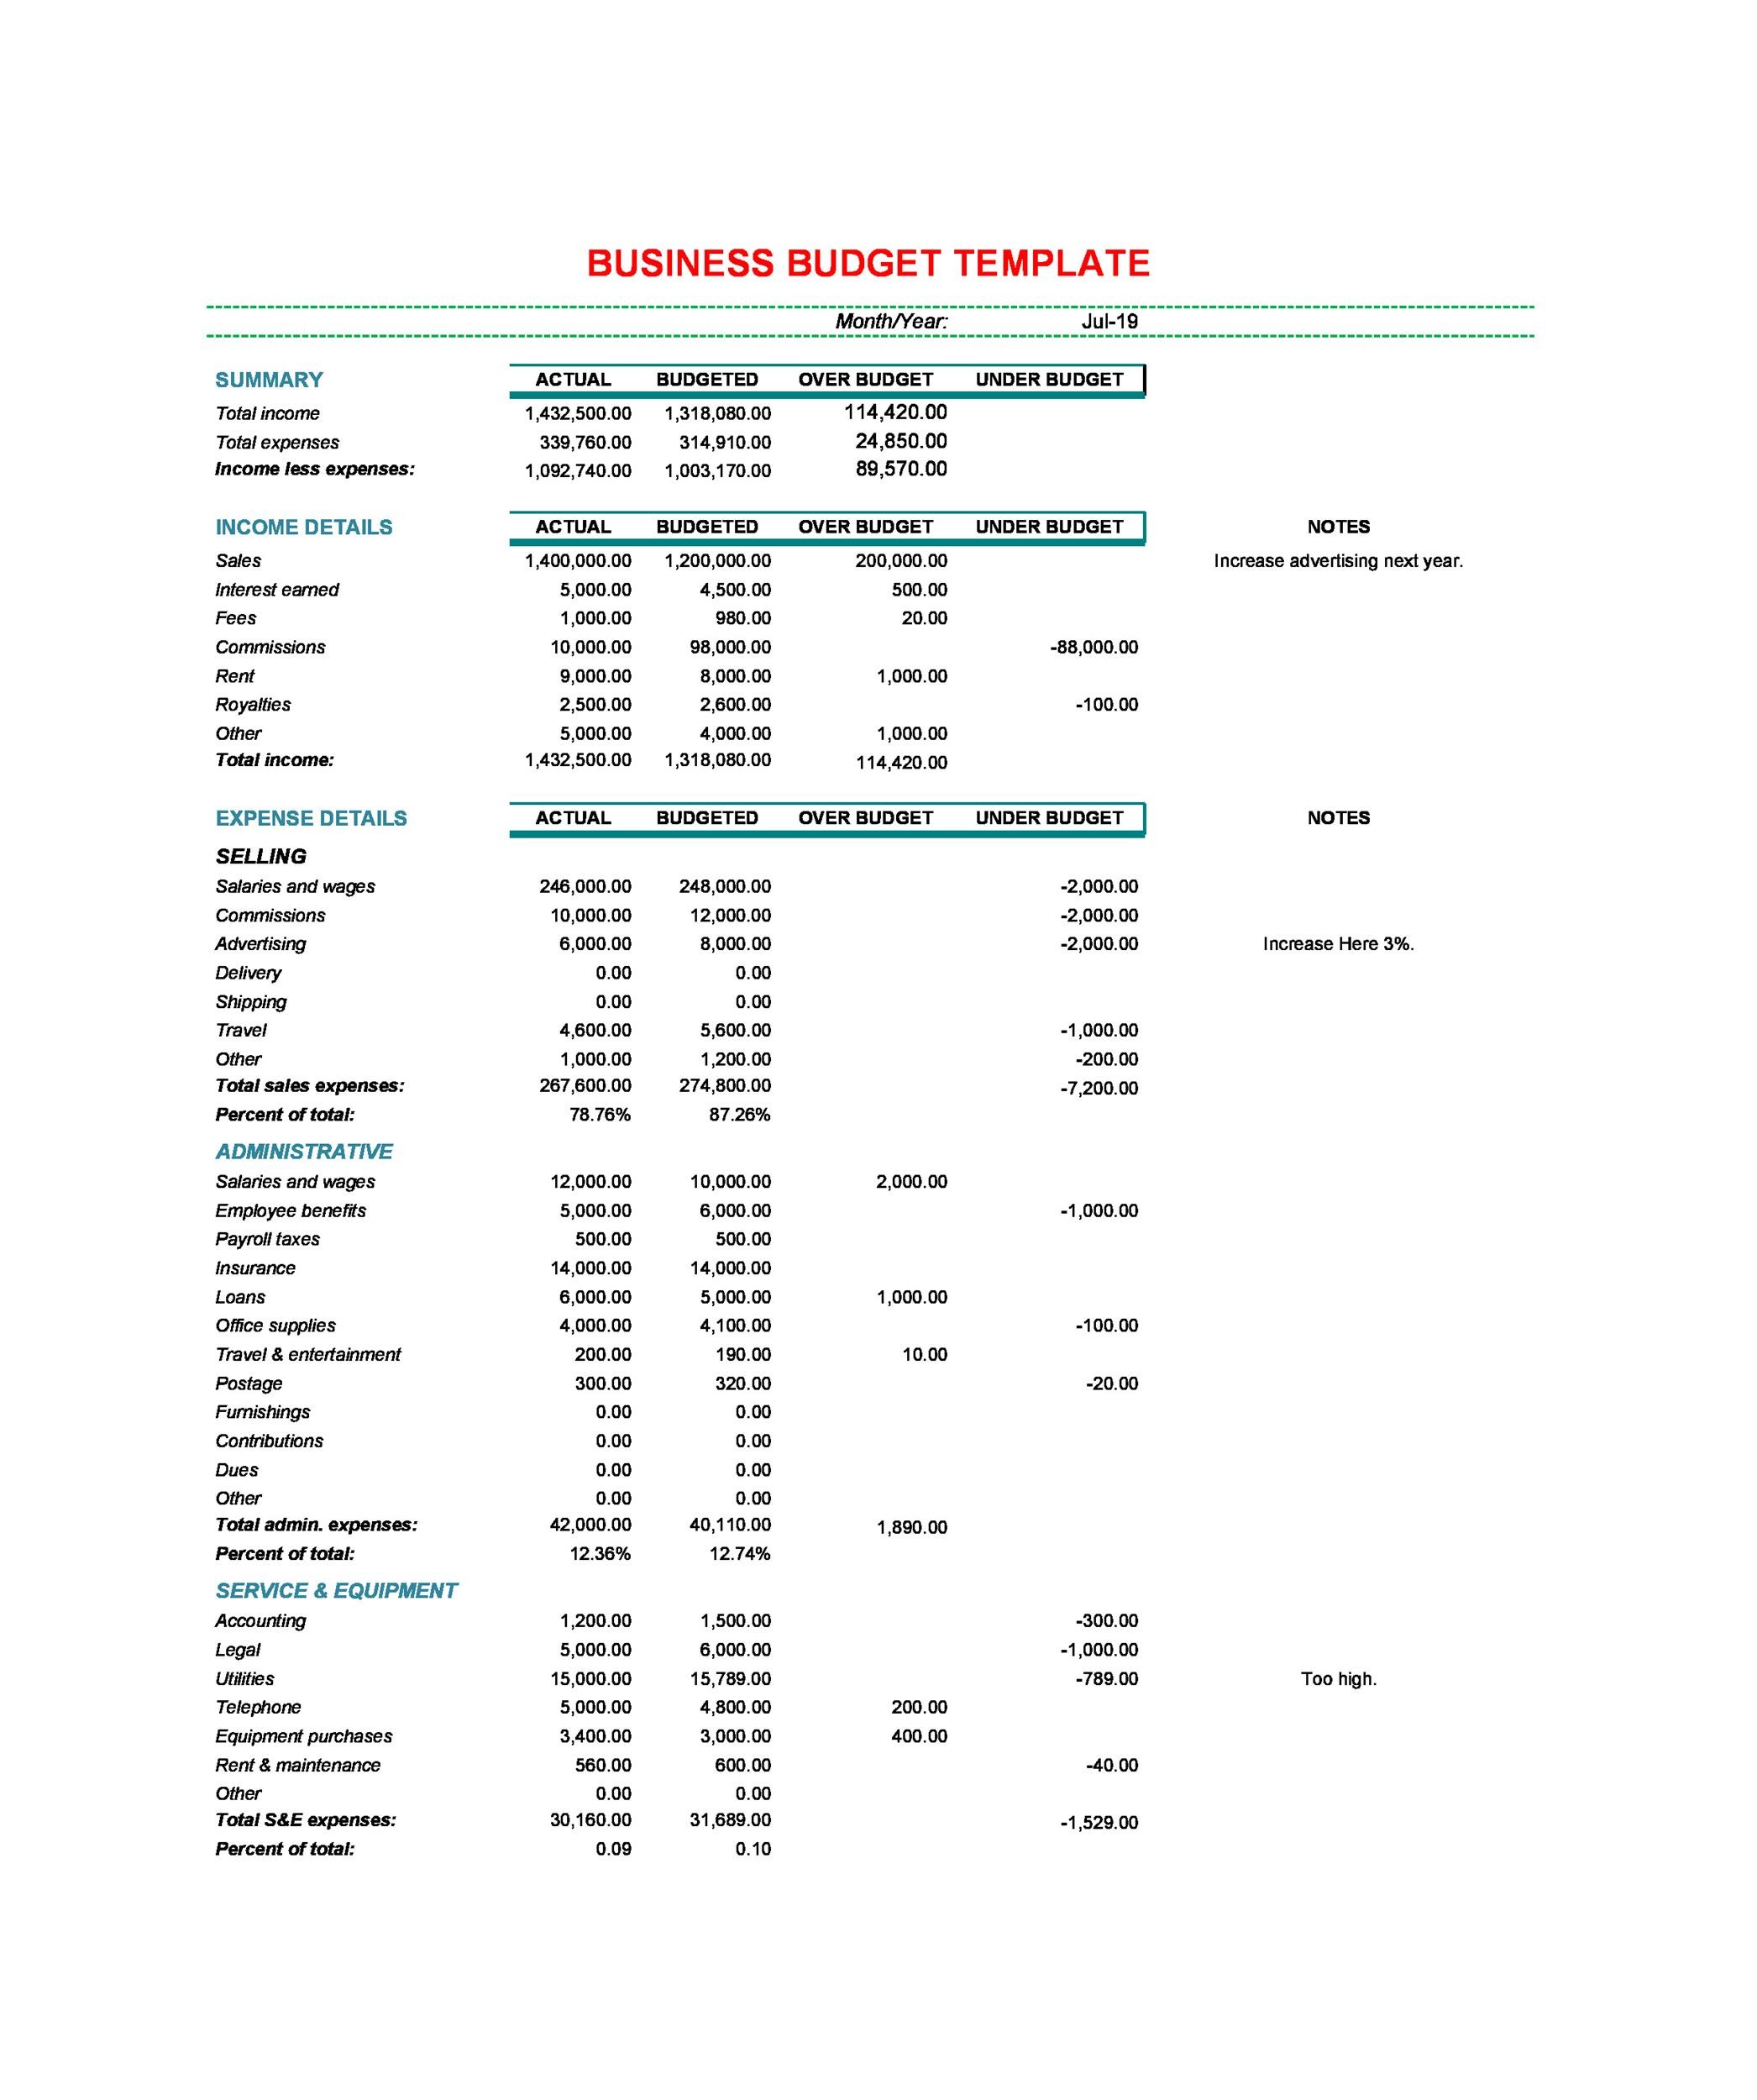 Free business budget template 15